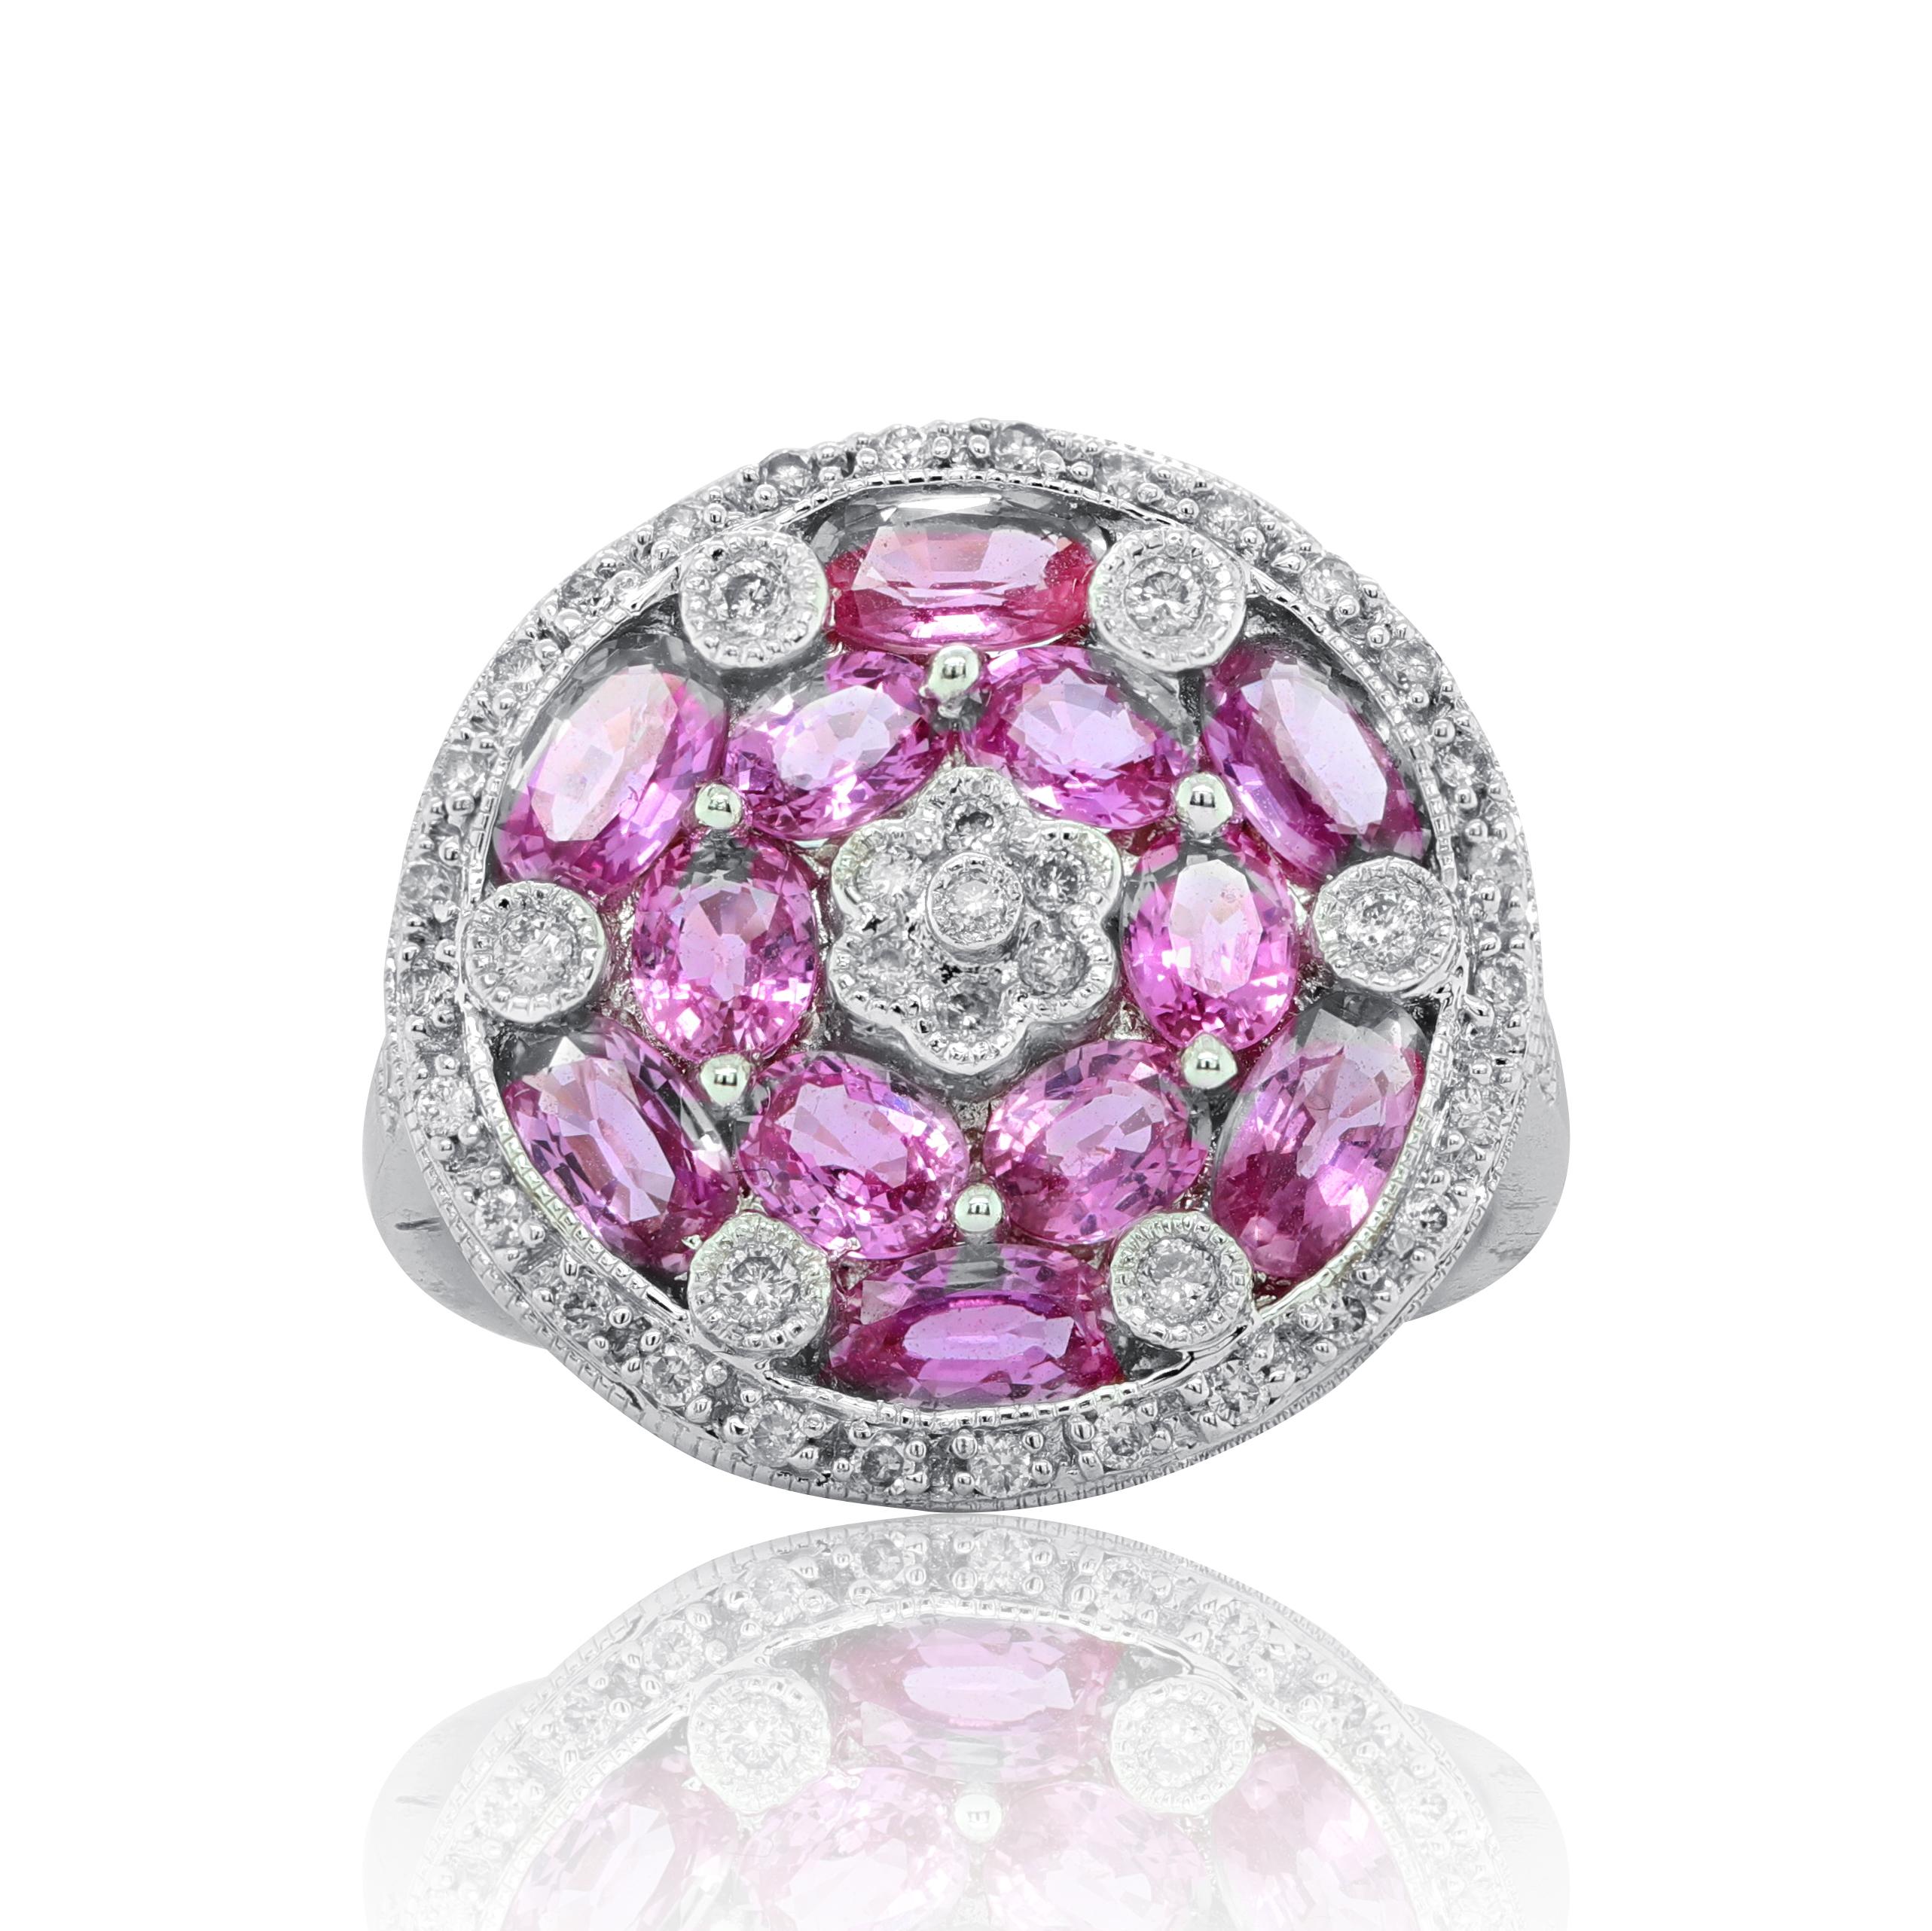 18Kt white gold sapphire ring with 2.00ct oval pink sapphires surrounded by 1.40ct micro pave diamonds.
